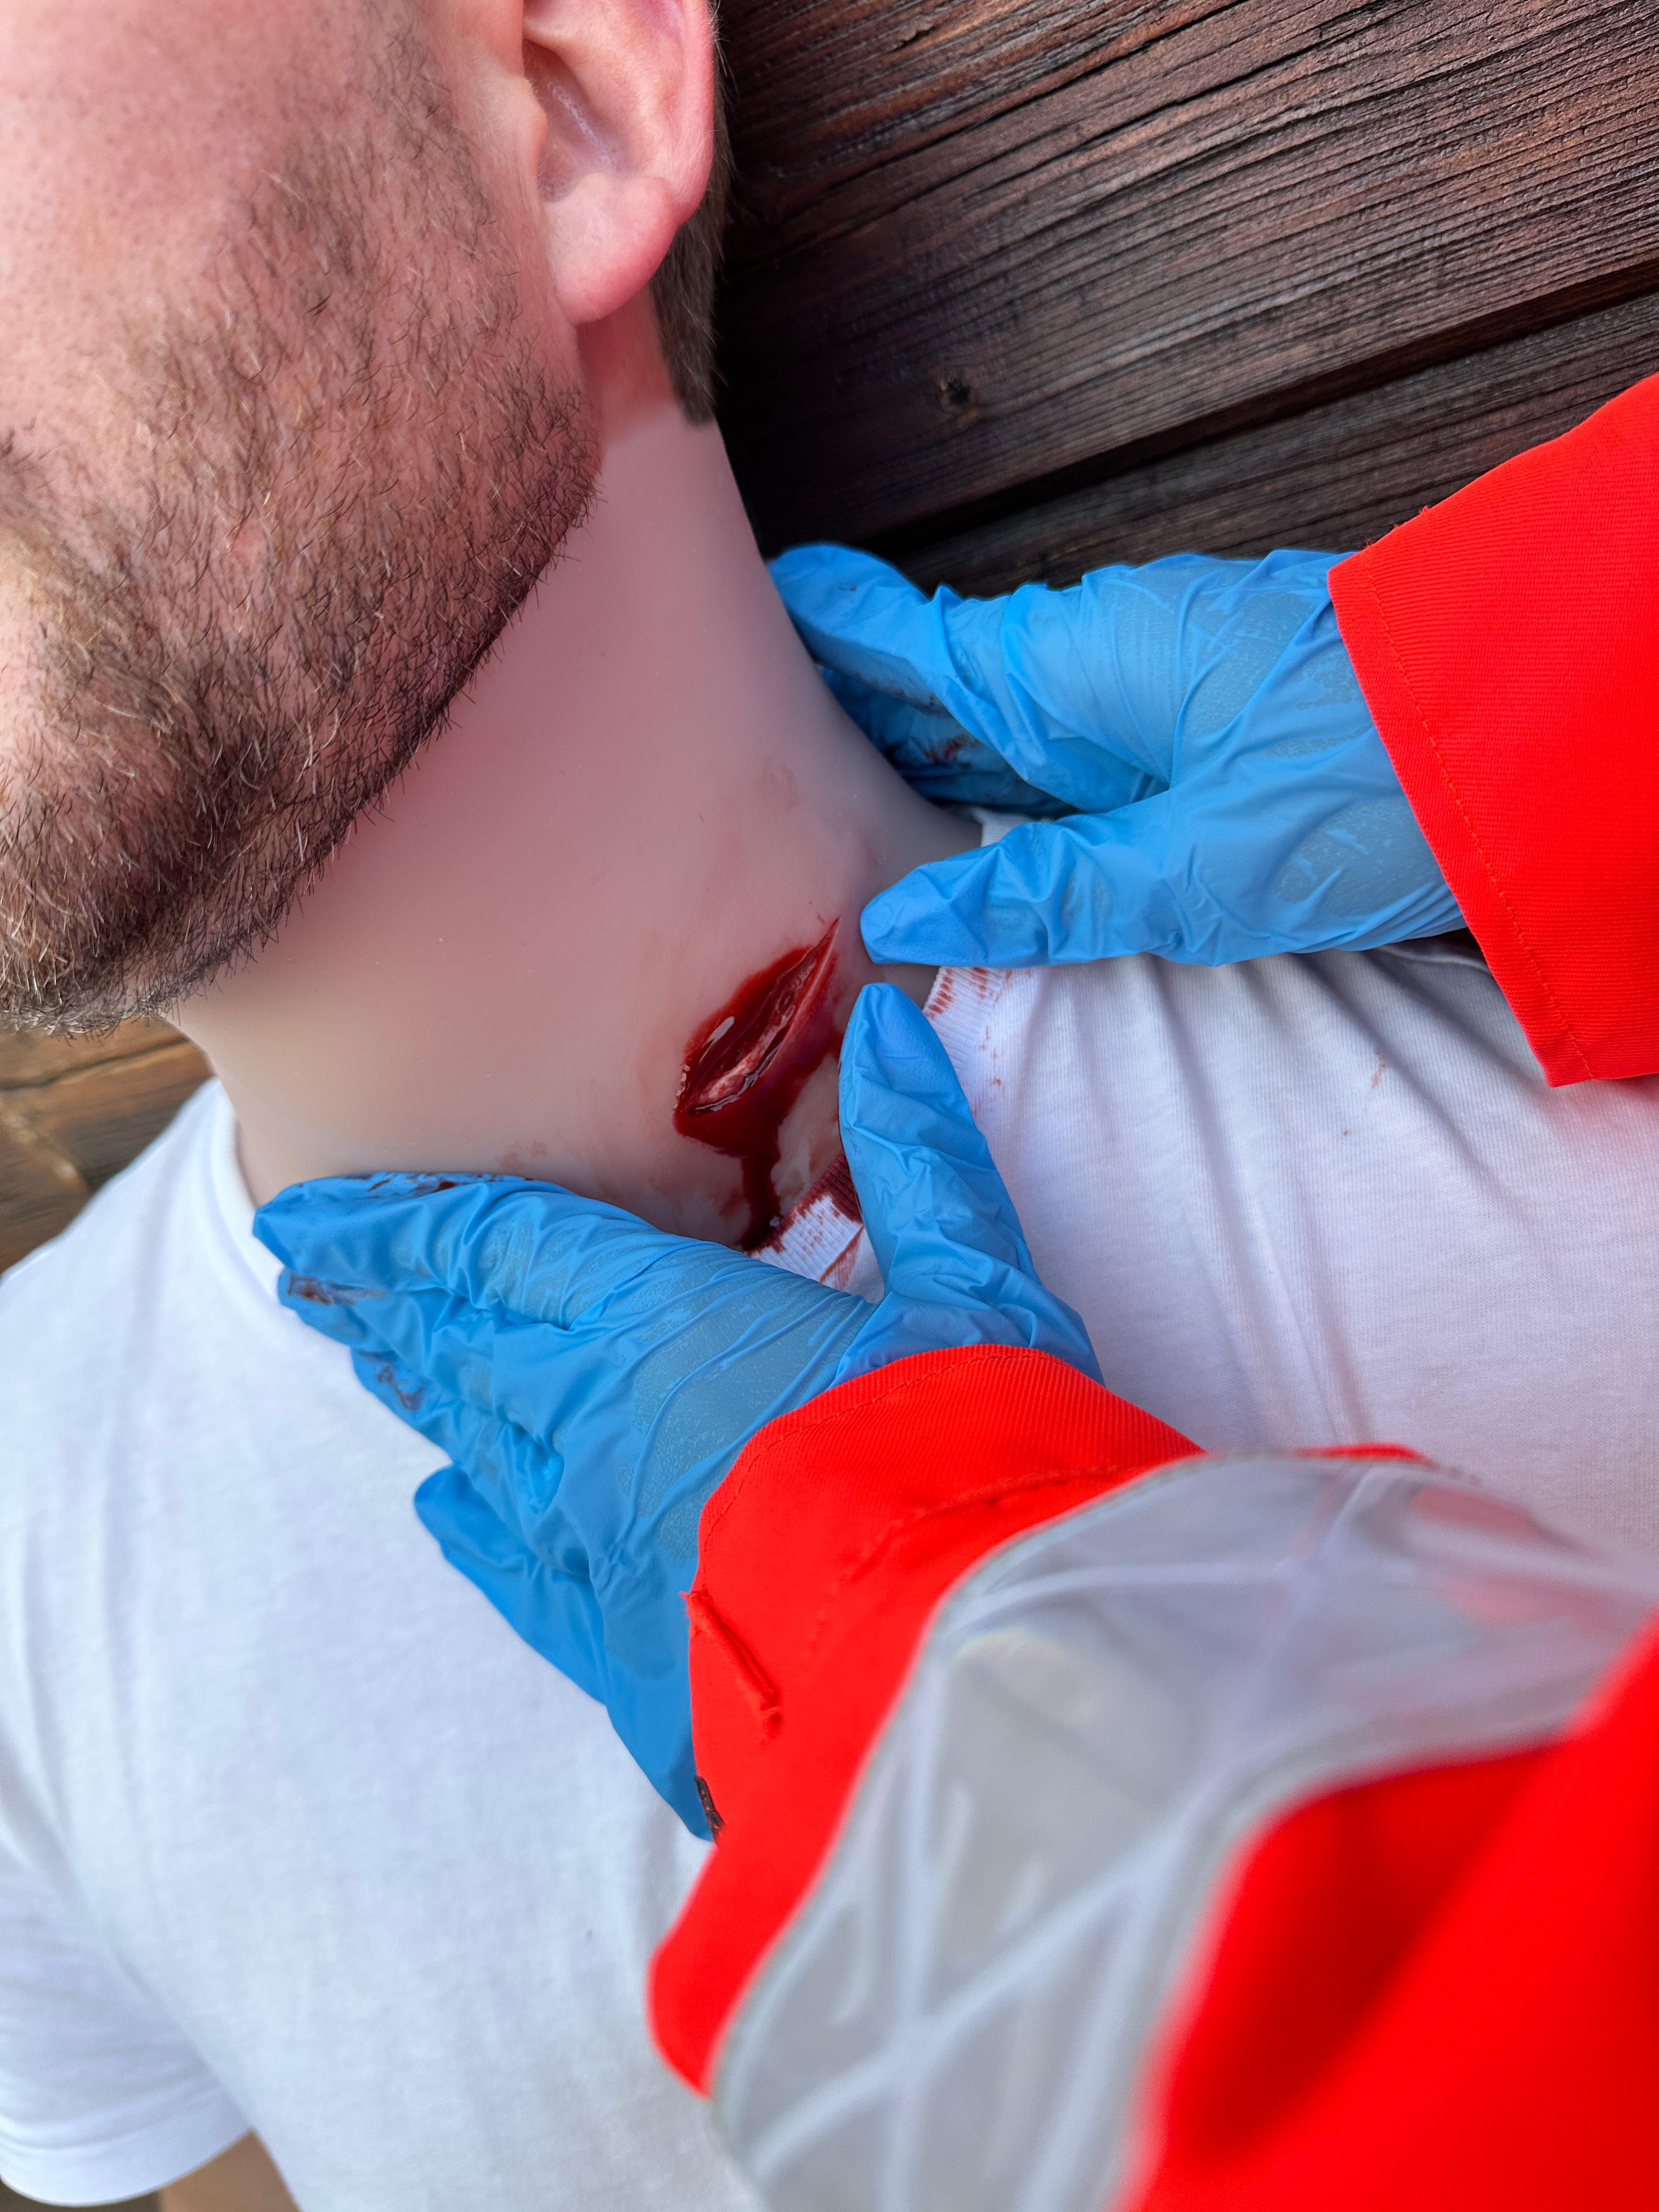 Wound-moulage-Stab-wound-neck-3